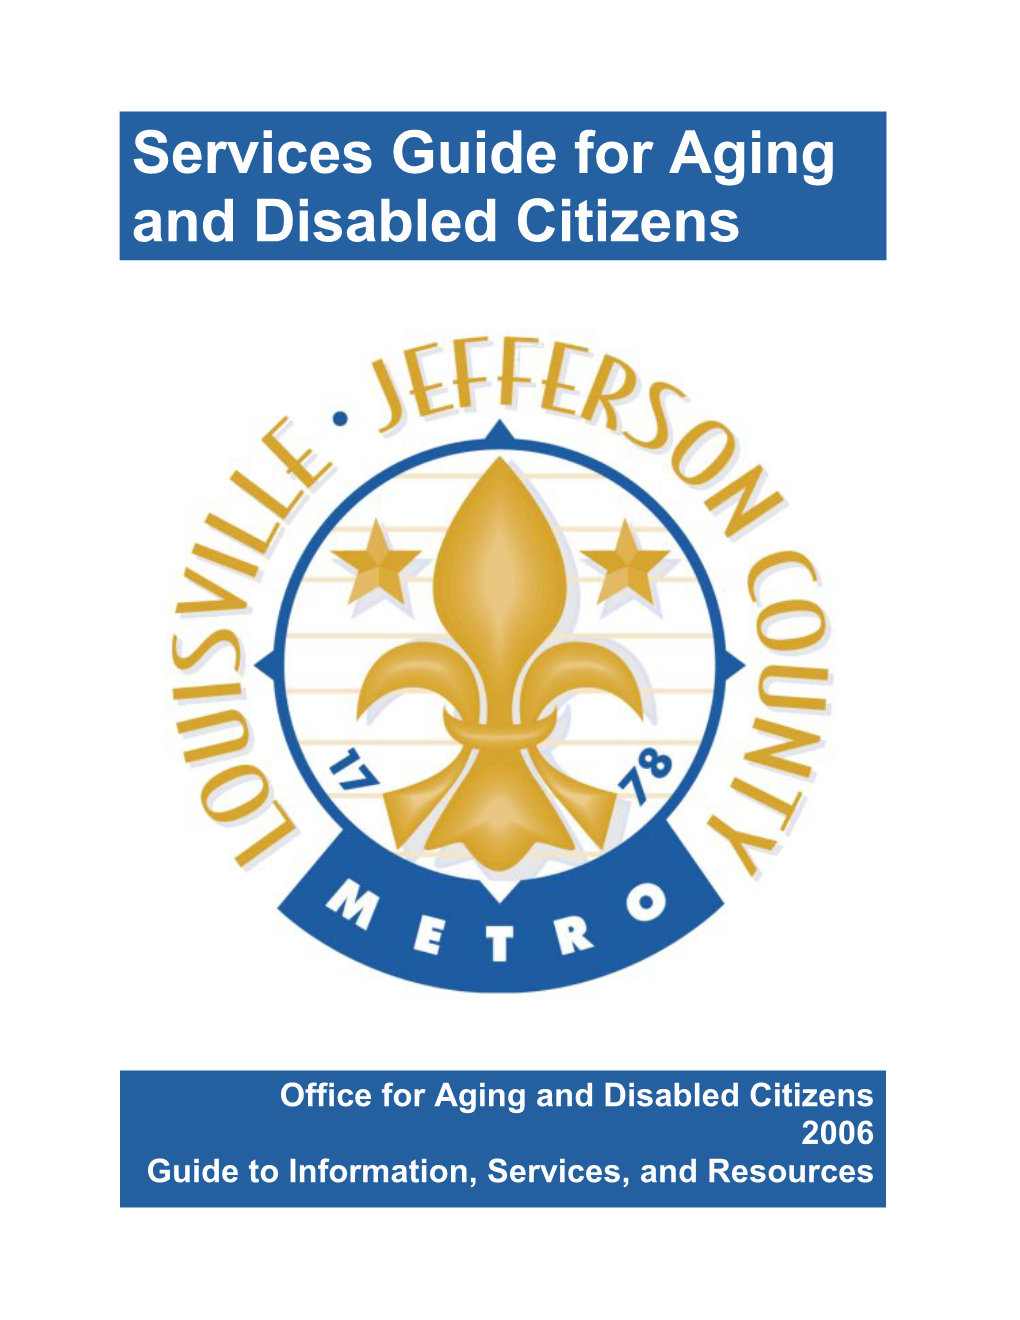 Services Guide for Aging and Disabled Citizens